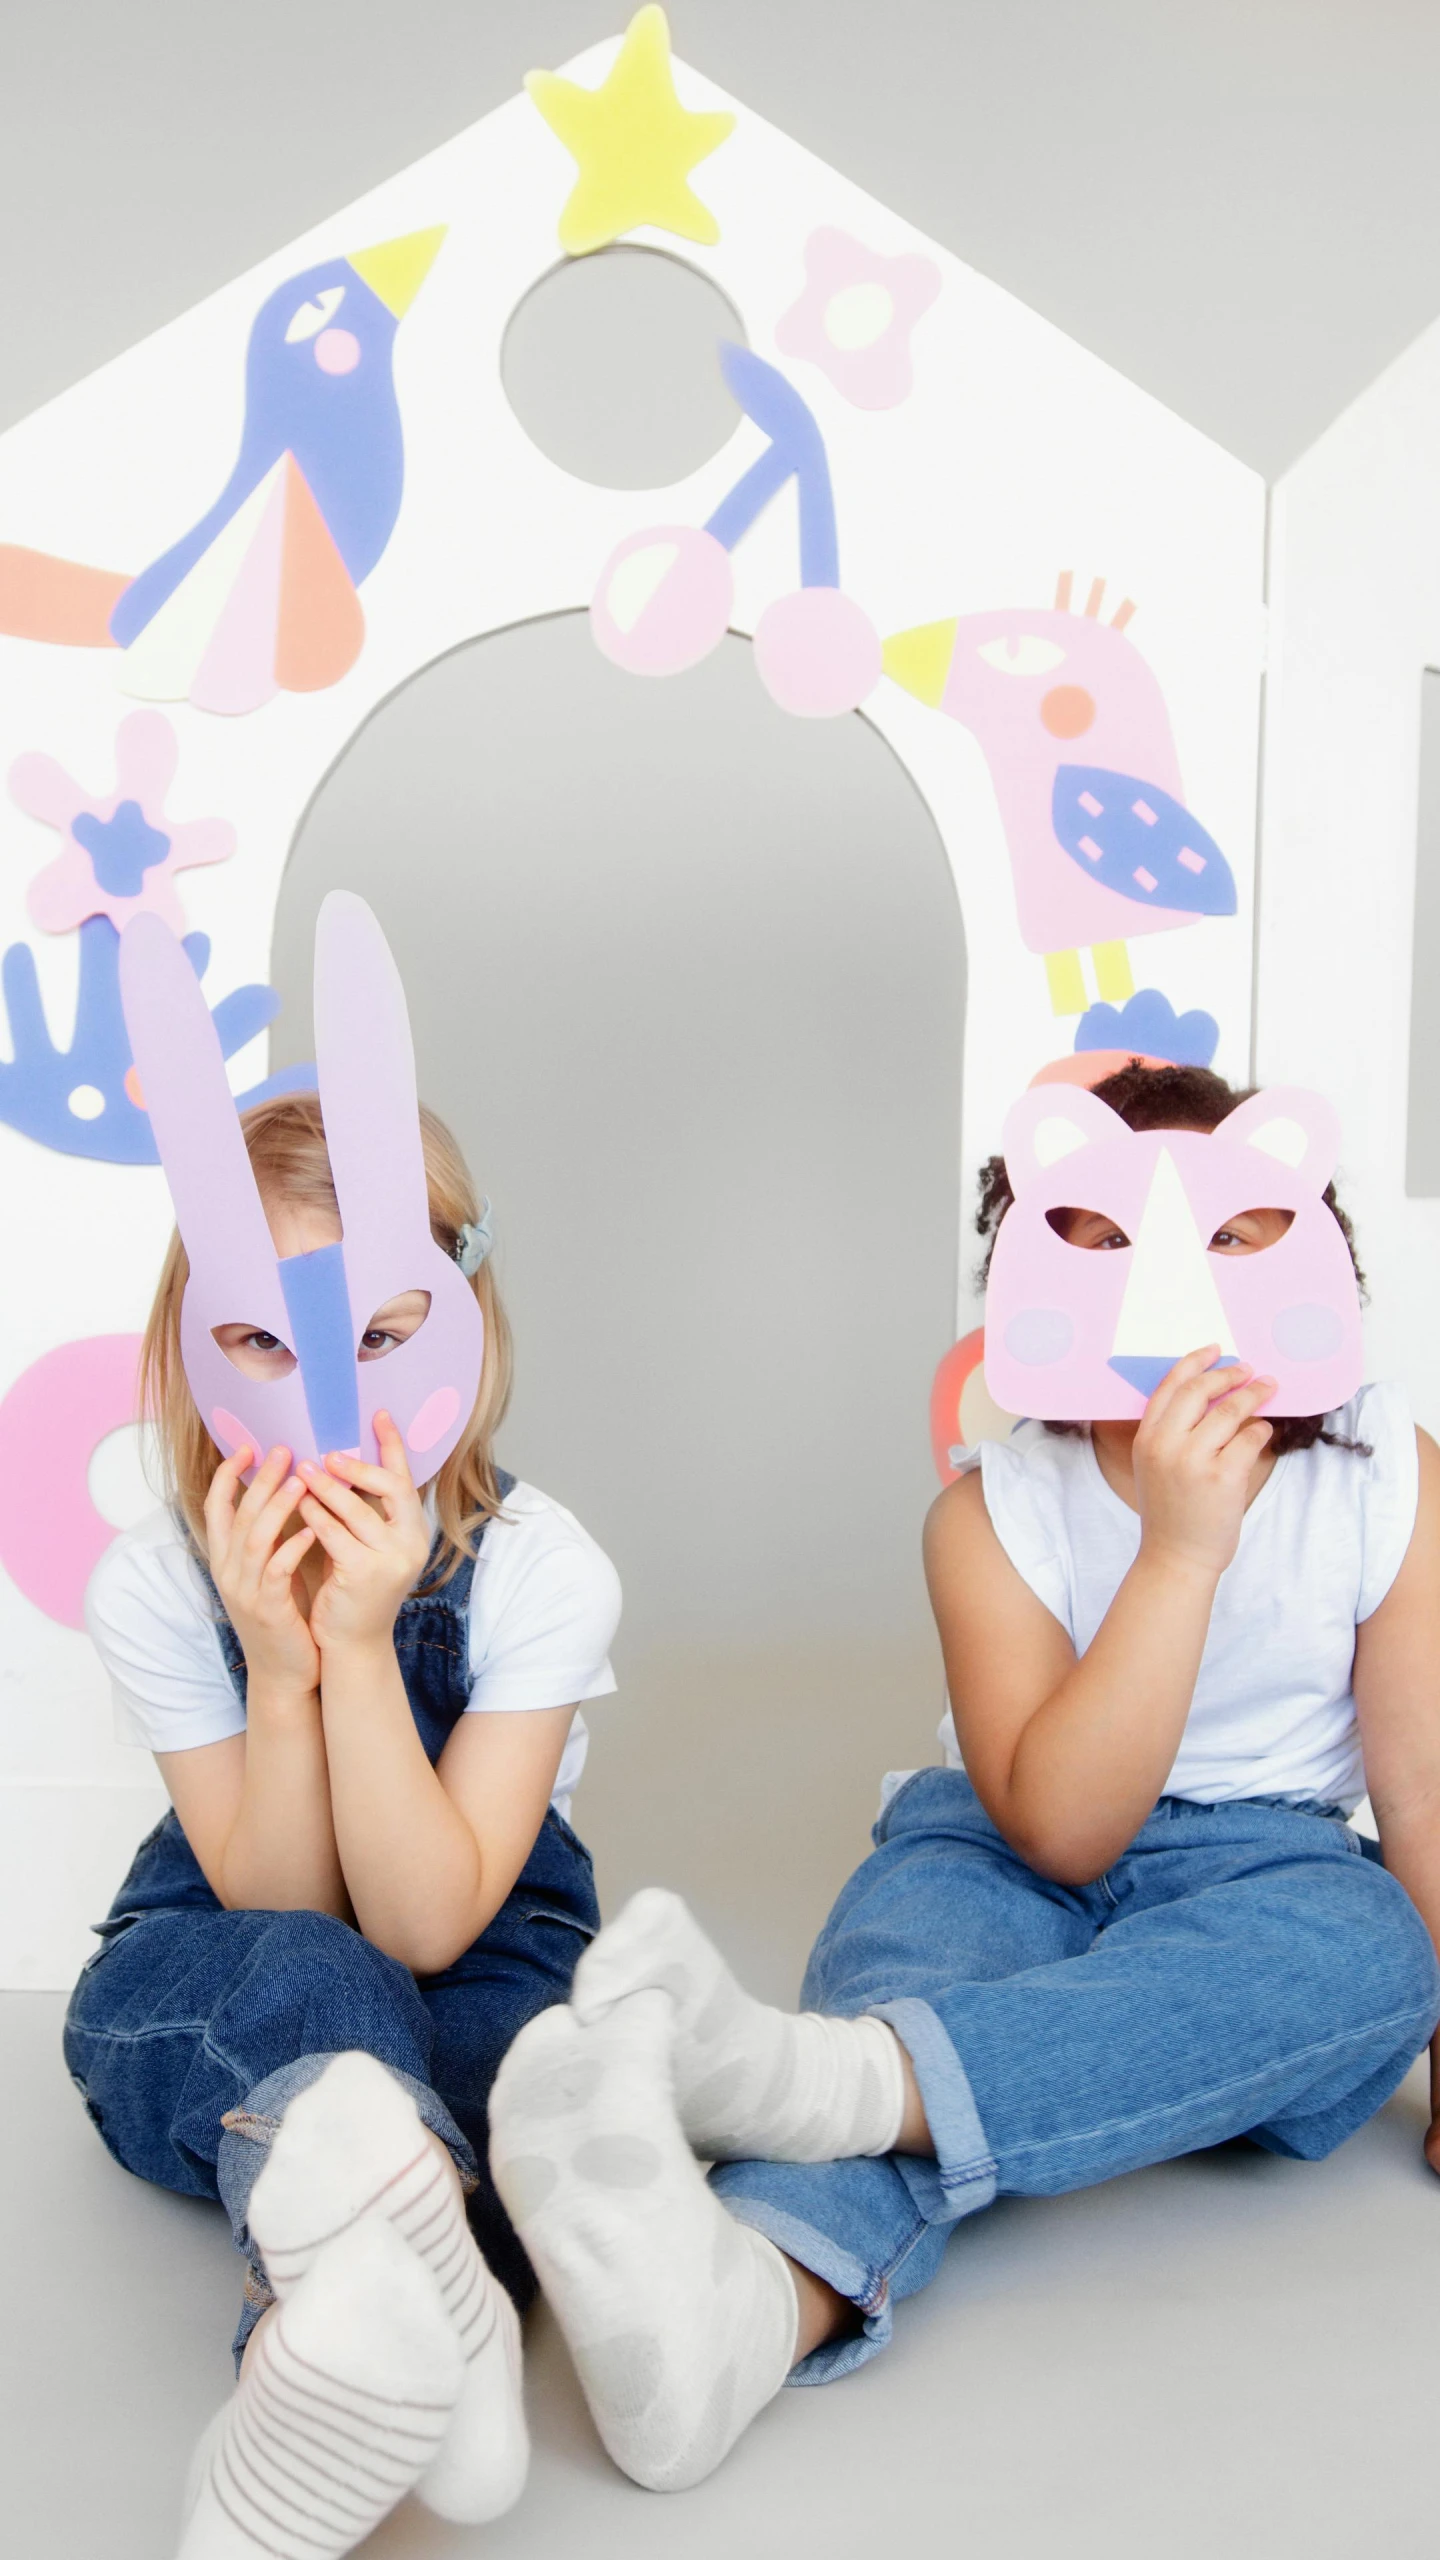 a couple of little girls sitting next to each other, a cartoon, pexels, interactive art, wearing giant paper masks, photoshoot for skincare brand, mirrors, bright fauna